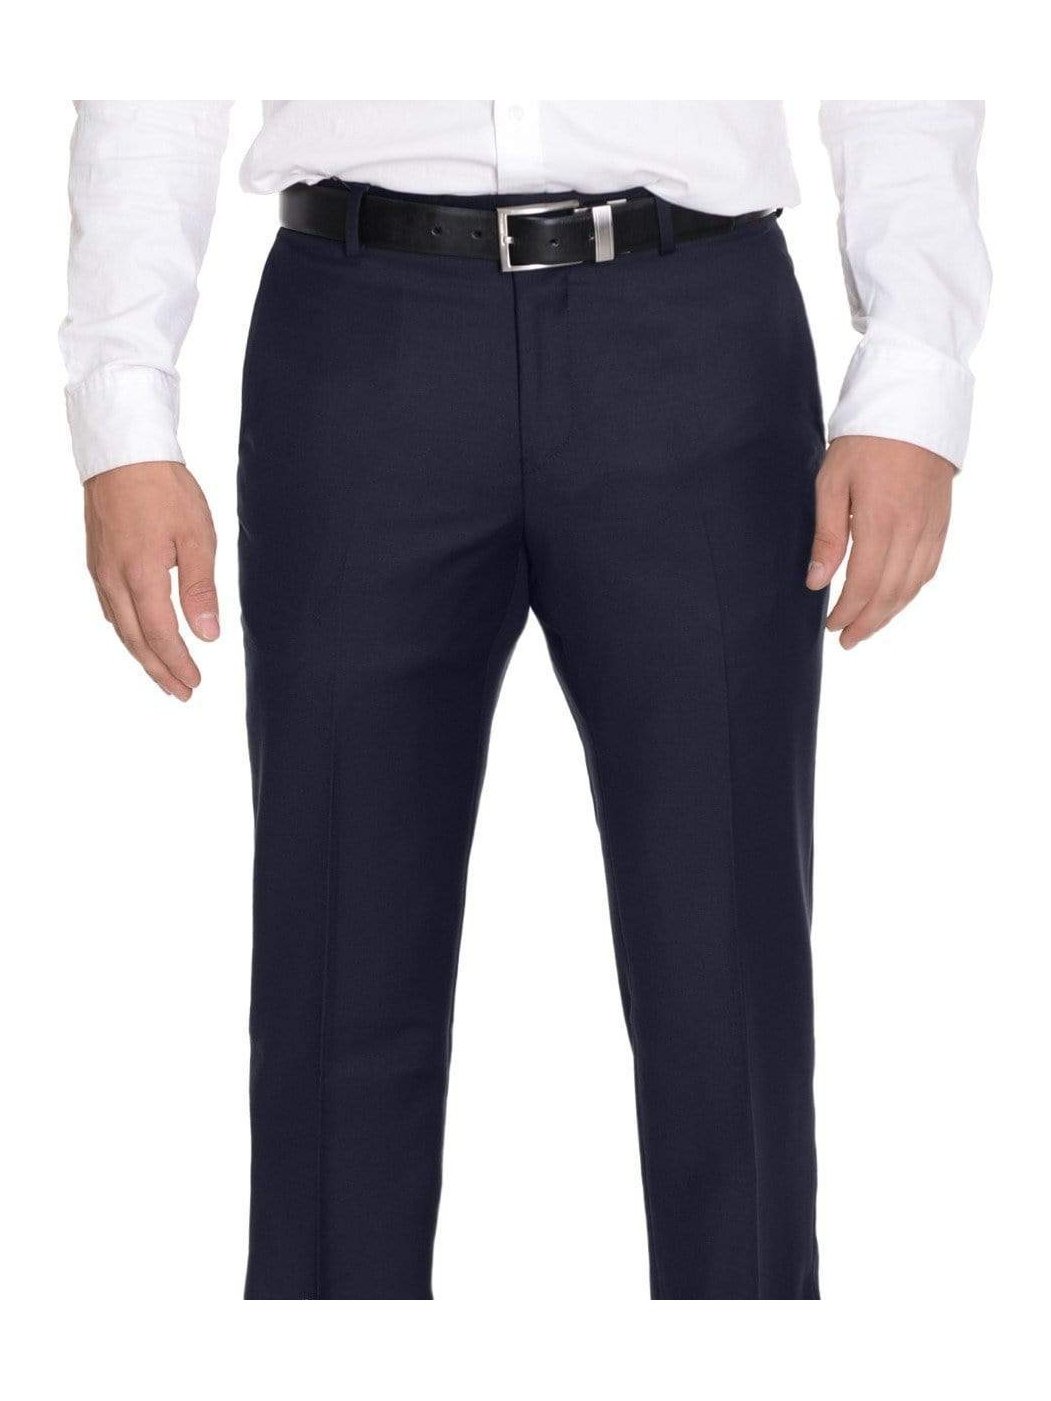 Washable Mens Cotton Slim Fit Navy Blue Formal Trousers at Best Price in  Bhubaneswar | Stit Chmen